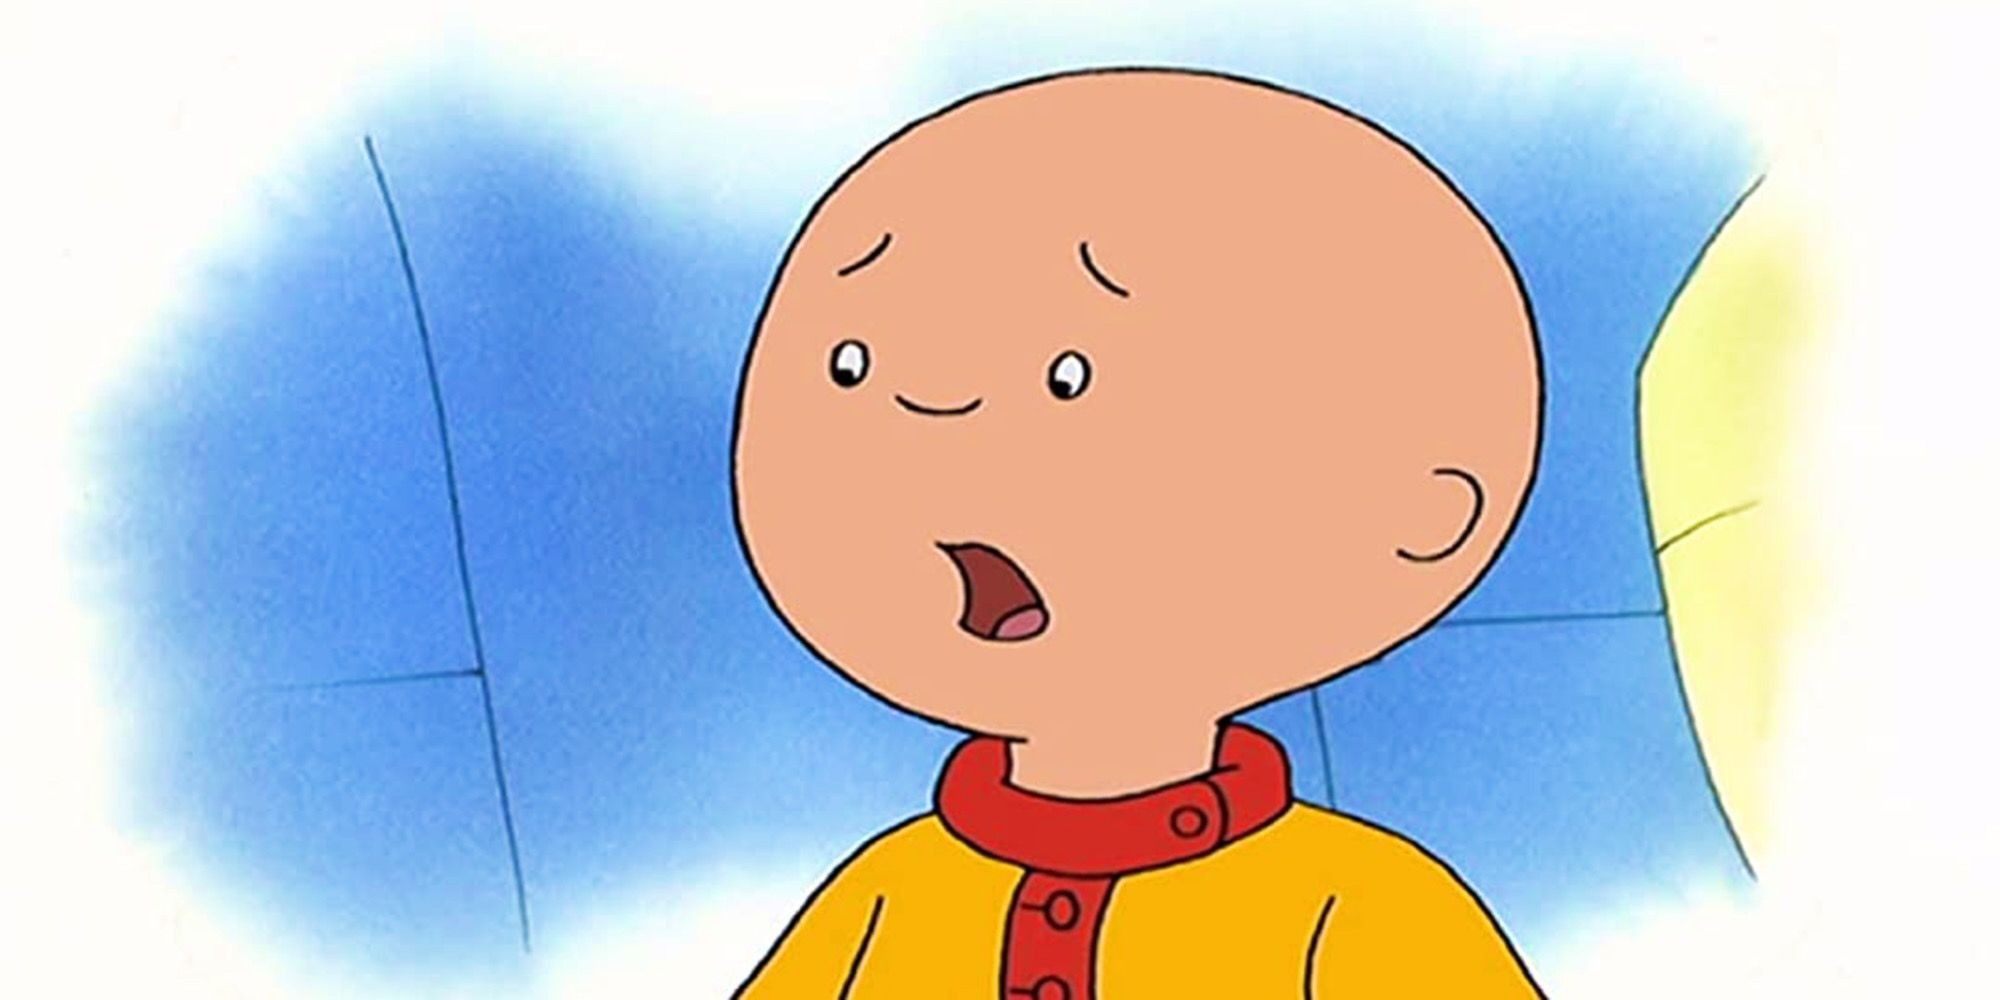 Caillou in the animated series